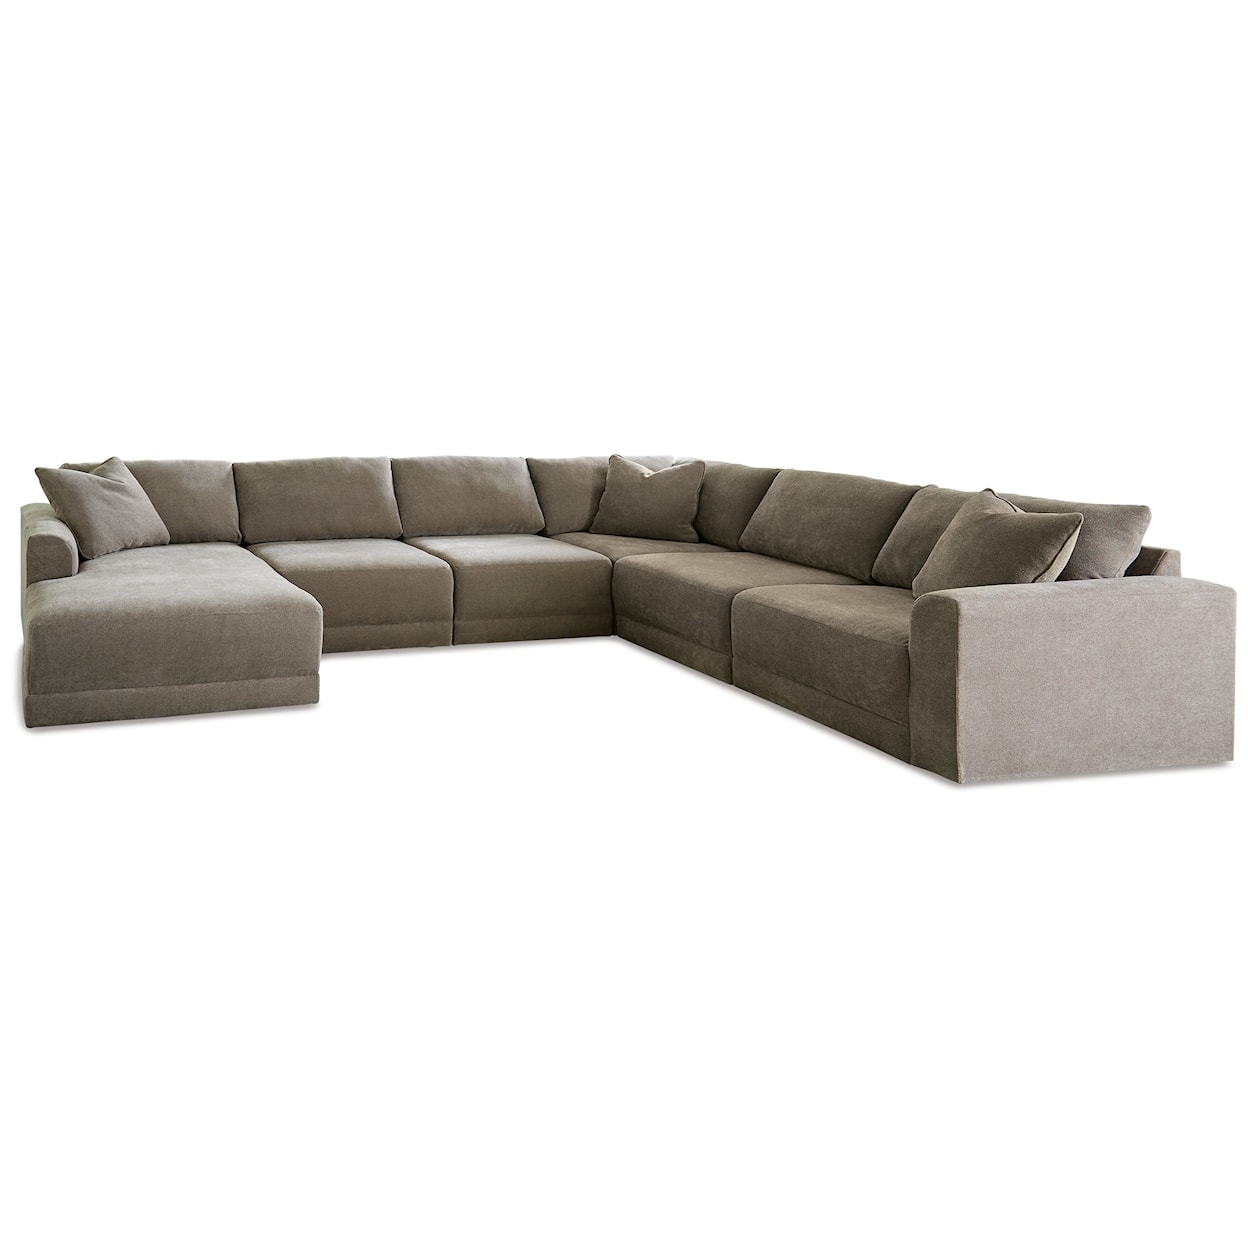 Benchcraft by Ashley Raeanna 6-Piece Sectional With Chaise